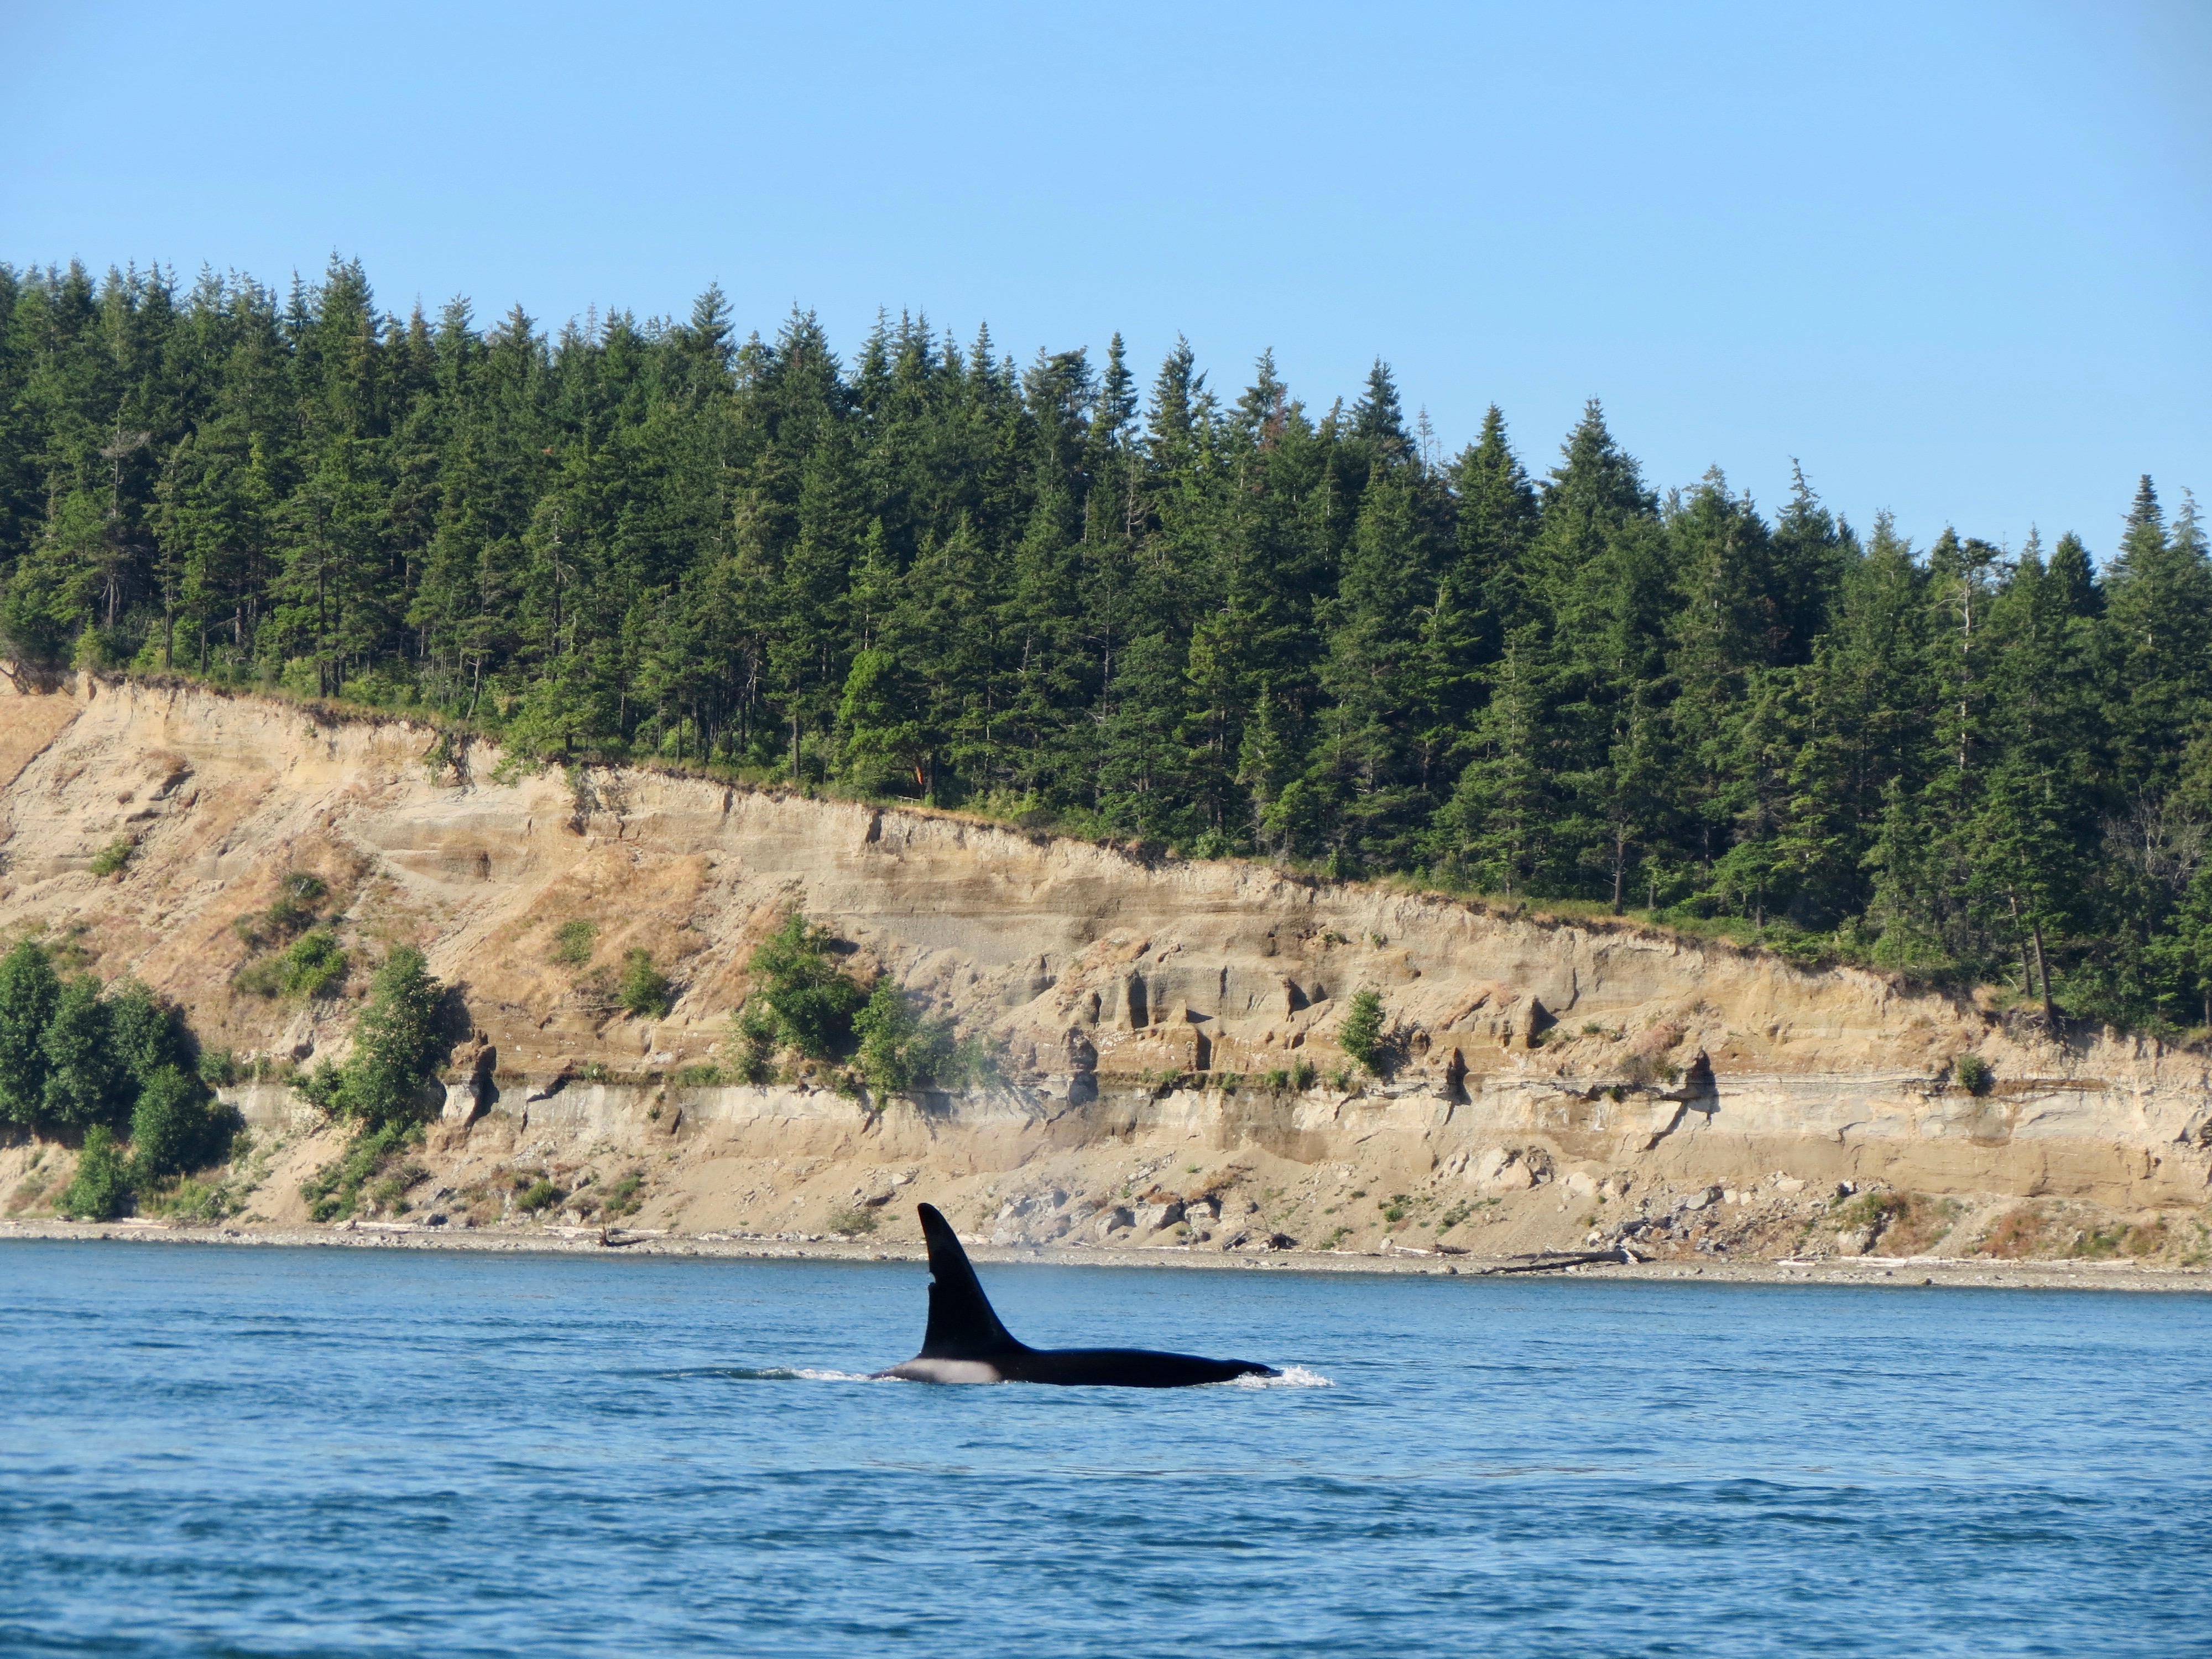 An orca rises in front of Yellow Bluff, part of Kelly's Point Conservation Area.